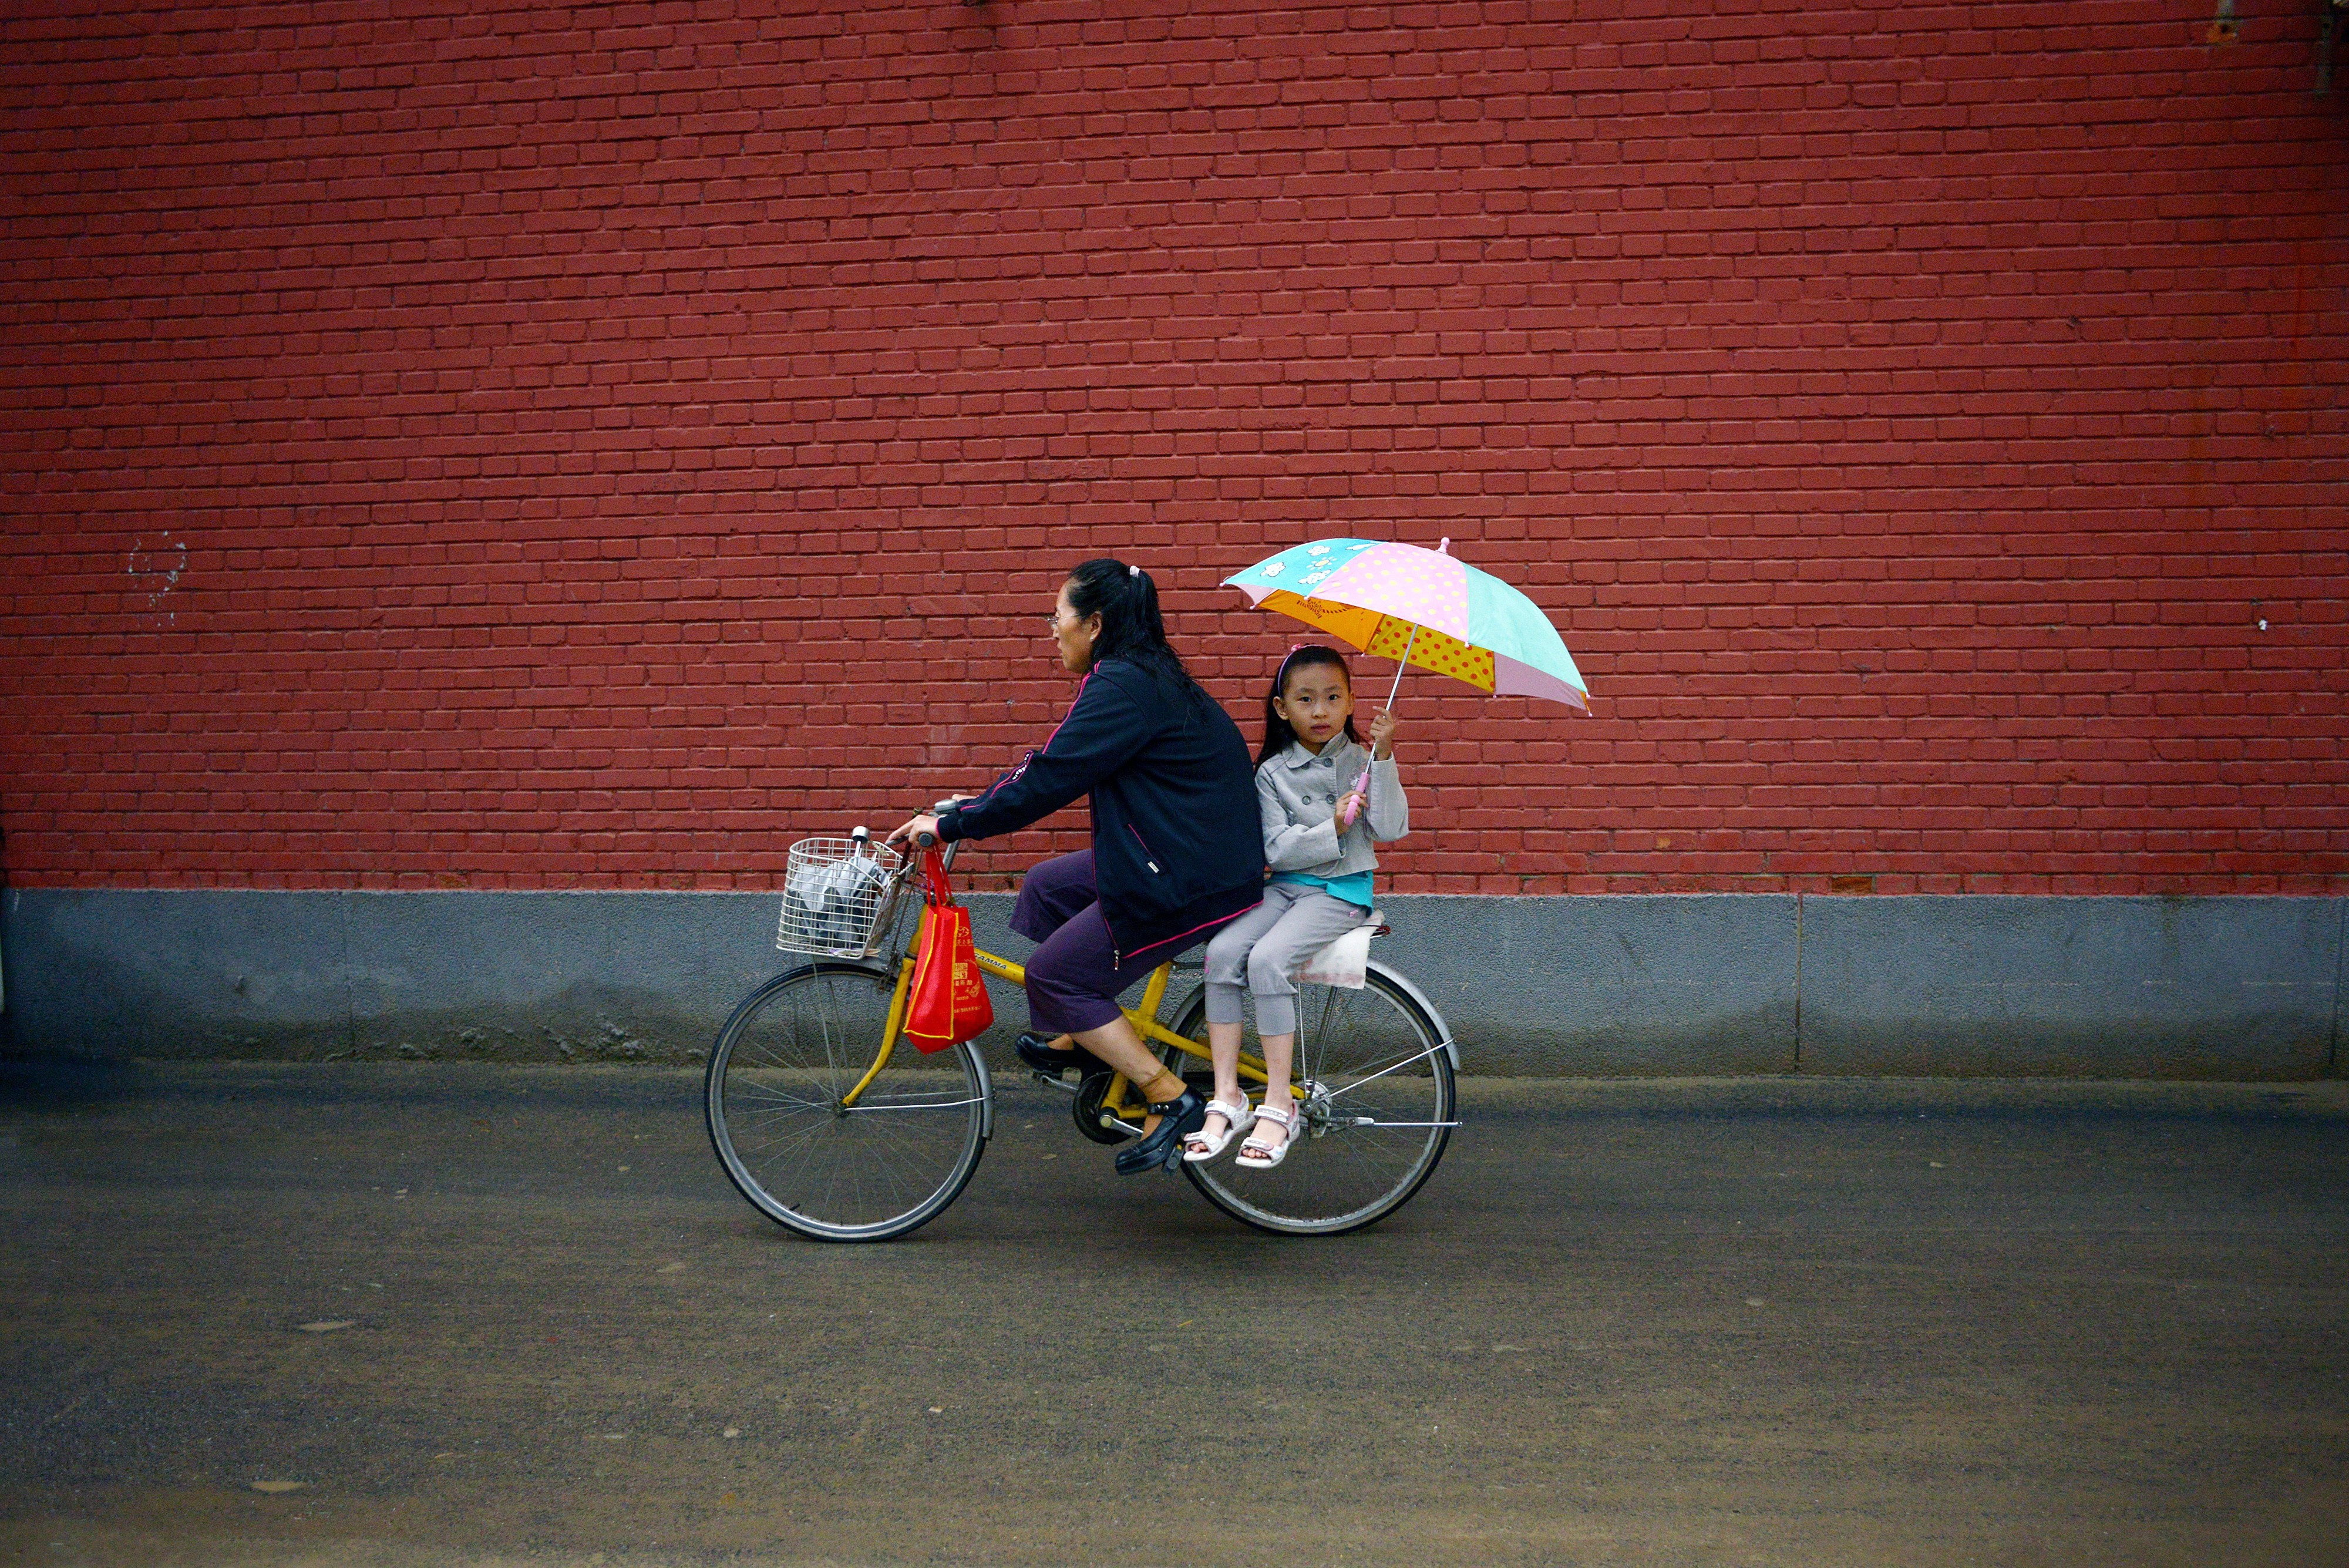 A girl holds an umbrella on the back of a bicycle along a road after school in Beijing on Sept. 2, 2014. (Wang Zhao—AFP/Getty Images)